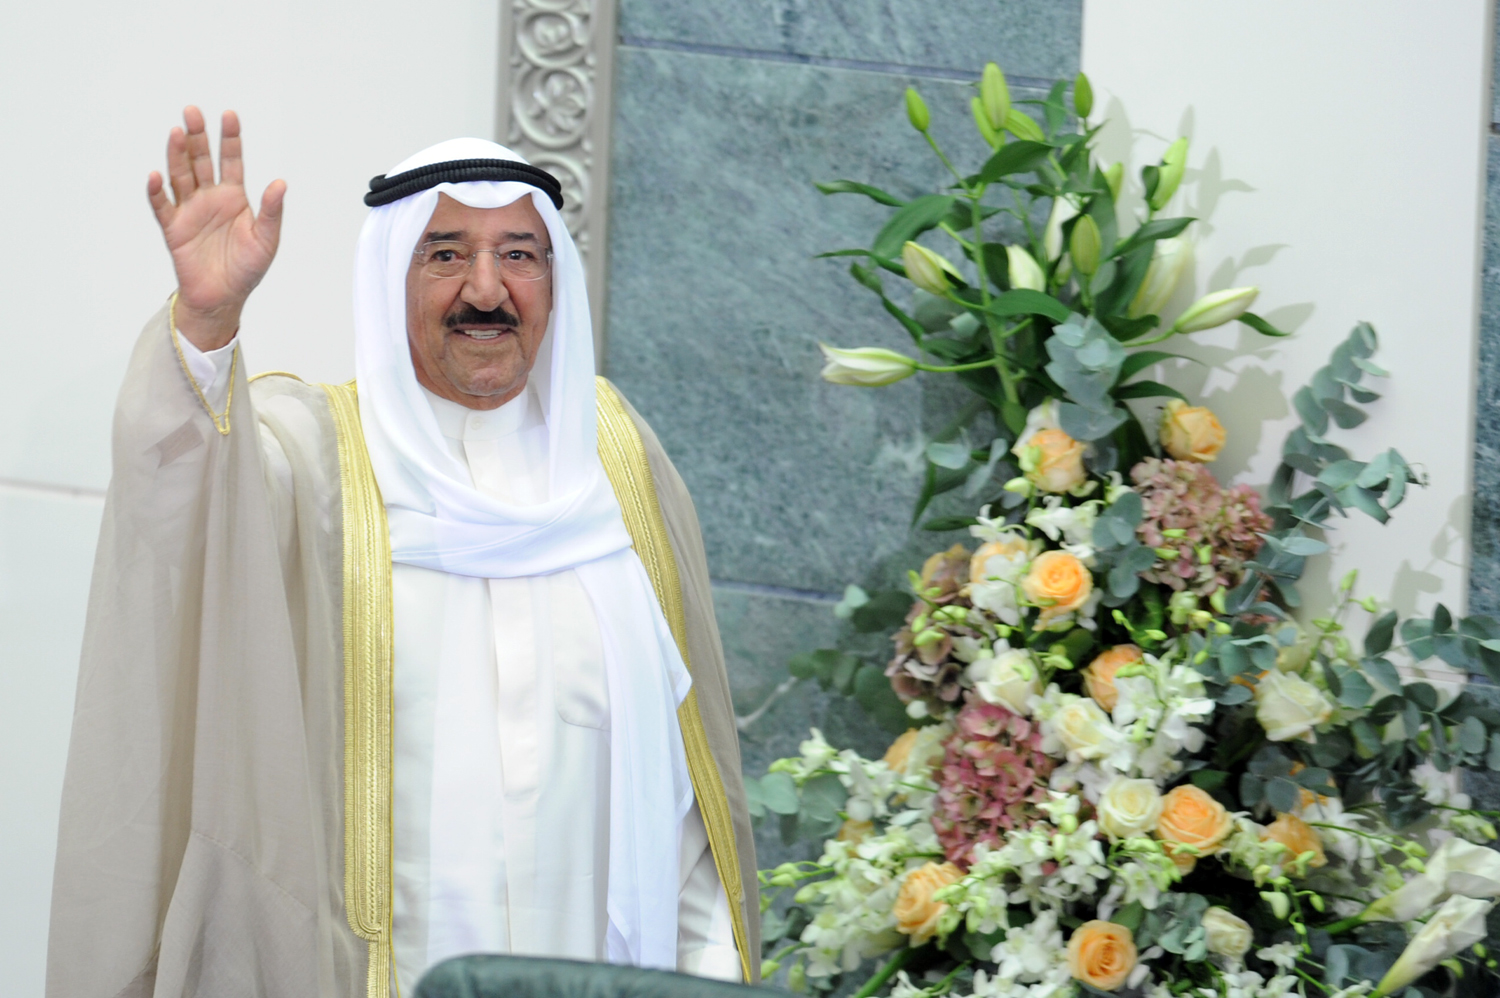 His Highness the Amir Sheikh Sabah Al-Ahmad Al-Jaber Al-Sabah during the opening of the third ordinary session